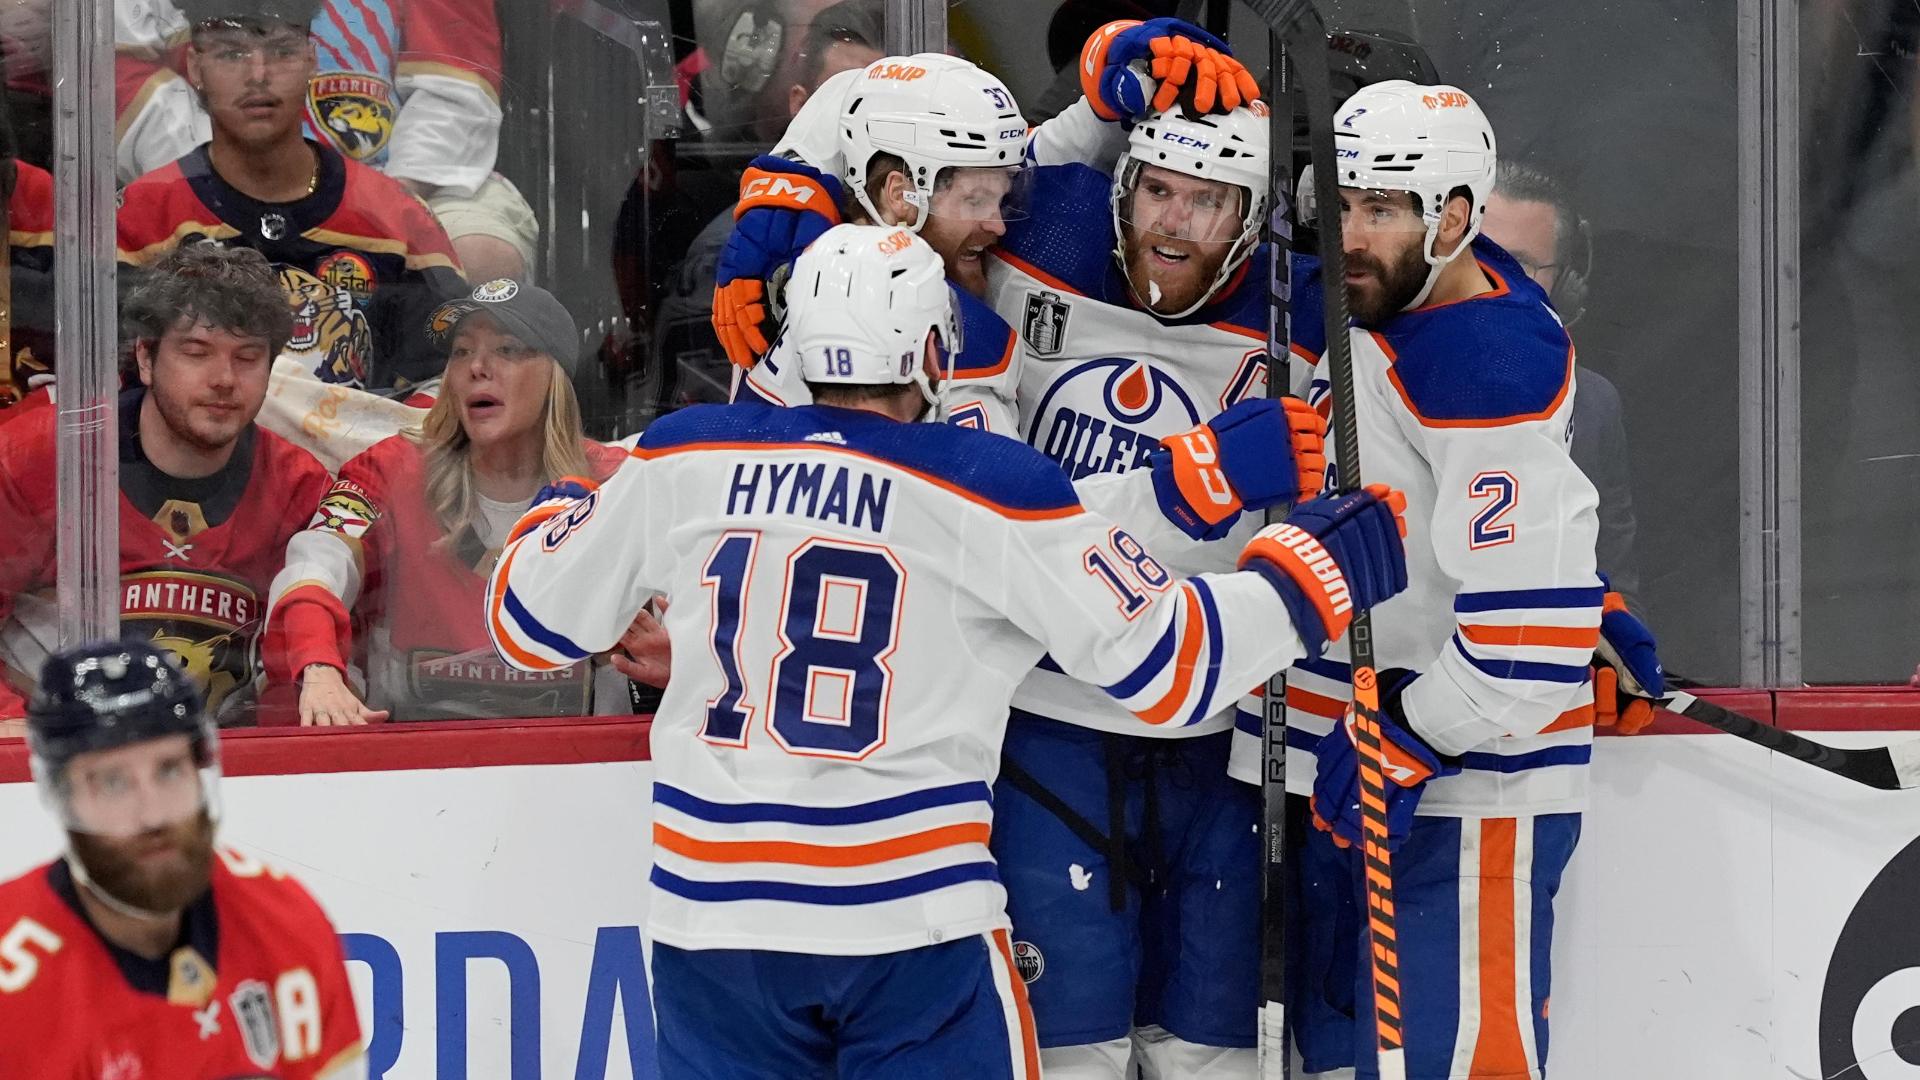 McDavid finds the back of the net for Oilers' third goal